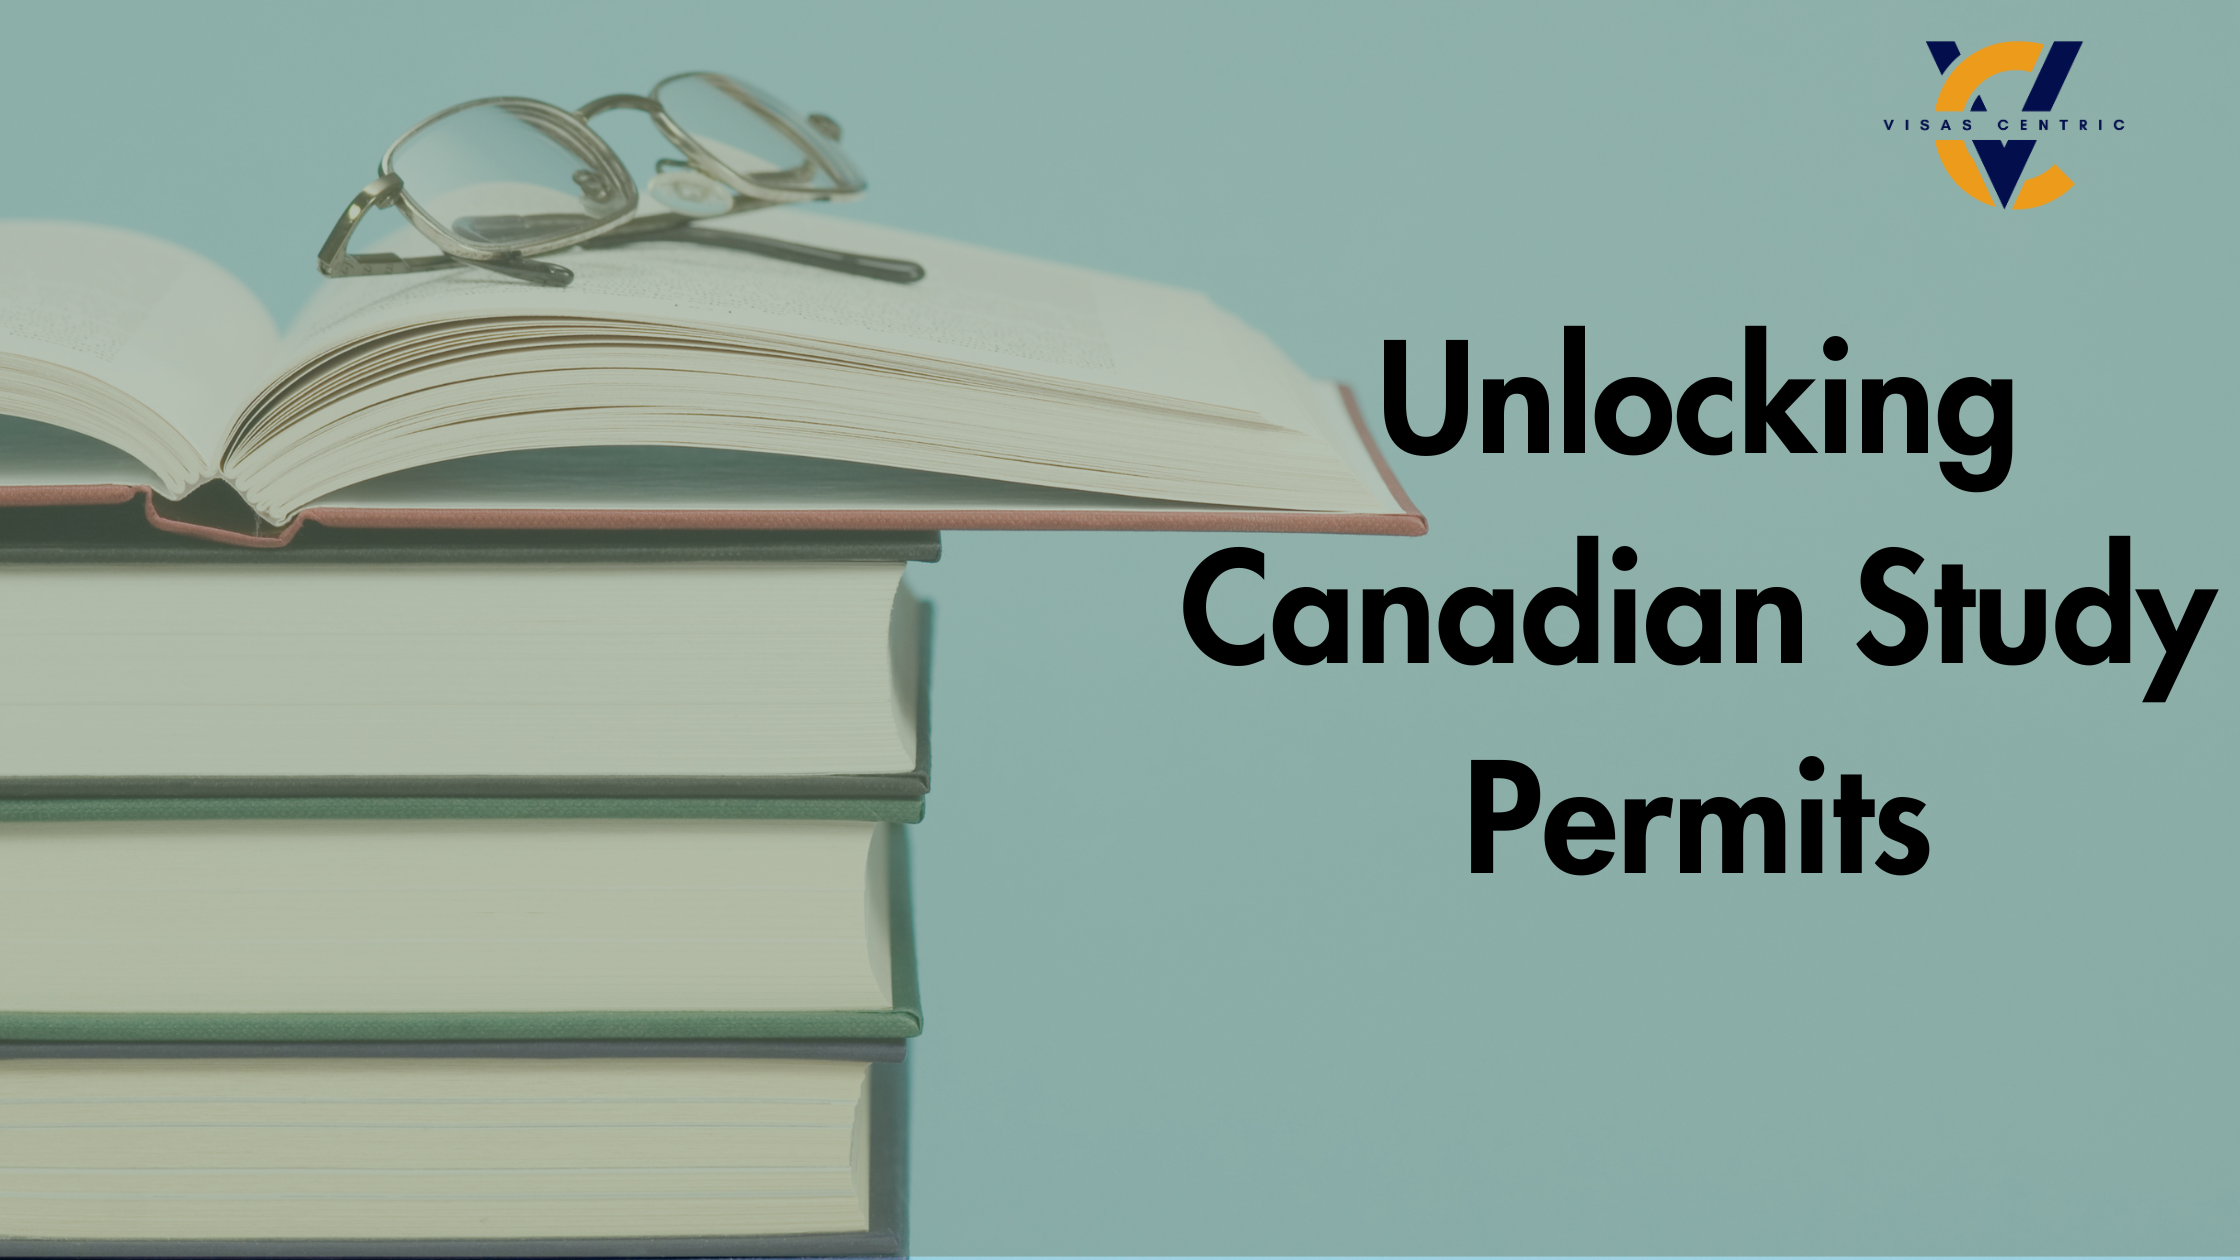 Unlocking Canadian Study Permits: Your PR Opportunity